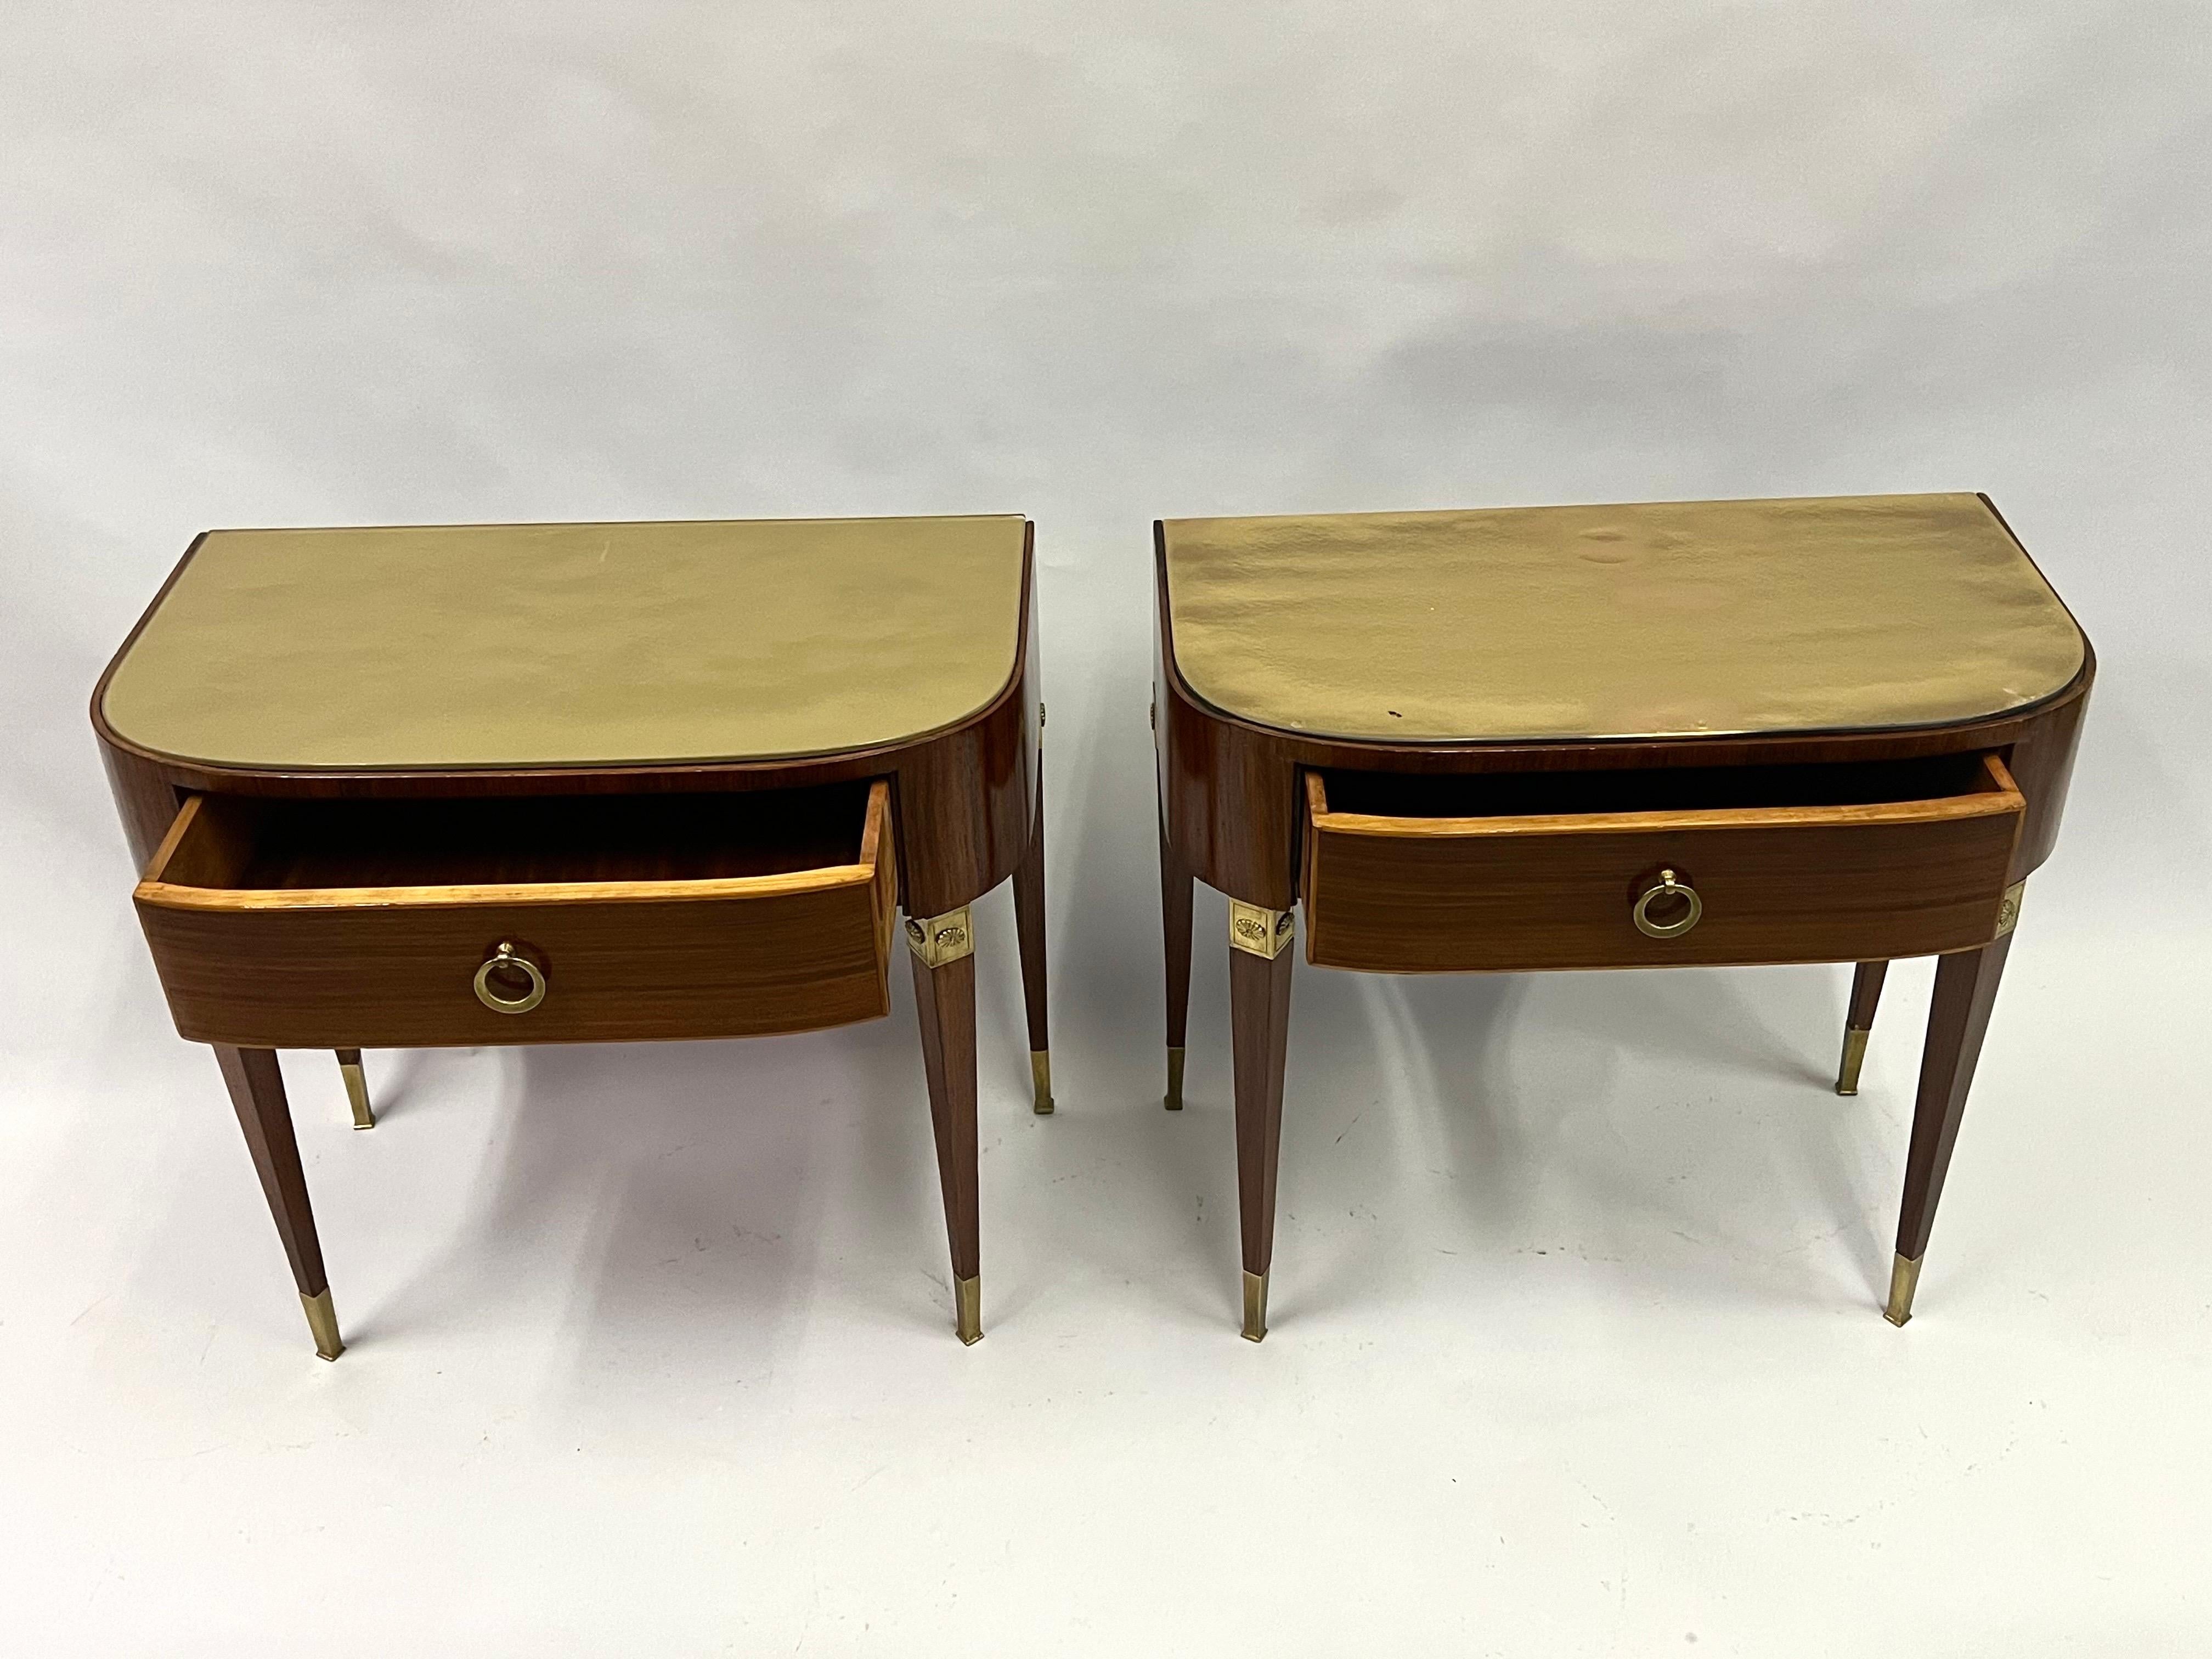 Gilt Pair of Italian Modern Neoclassical End or Side Tables / Nightstands, Gio Ponti For Sale